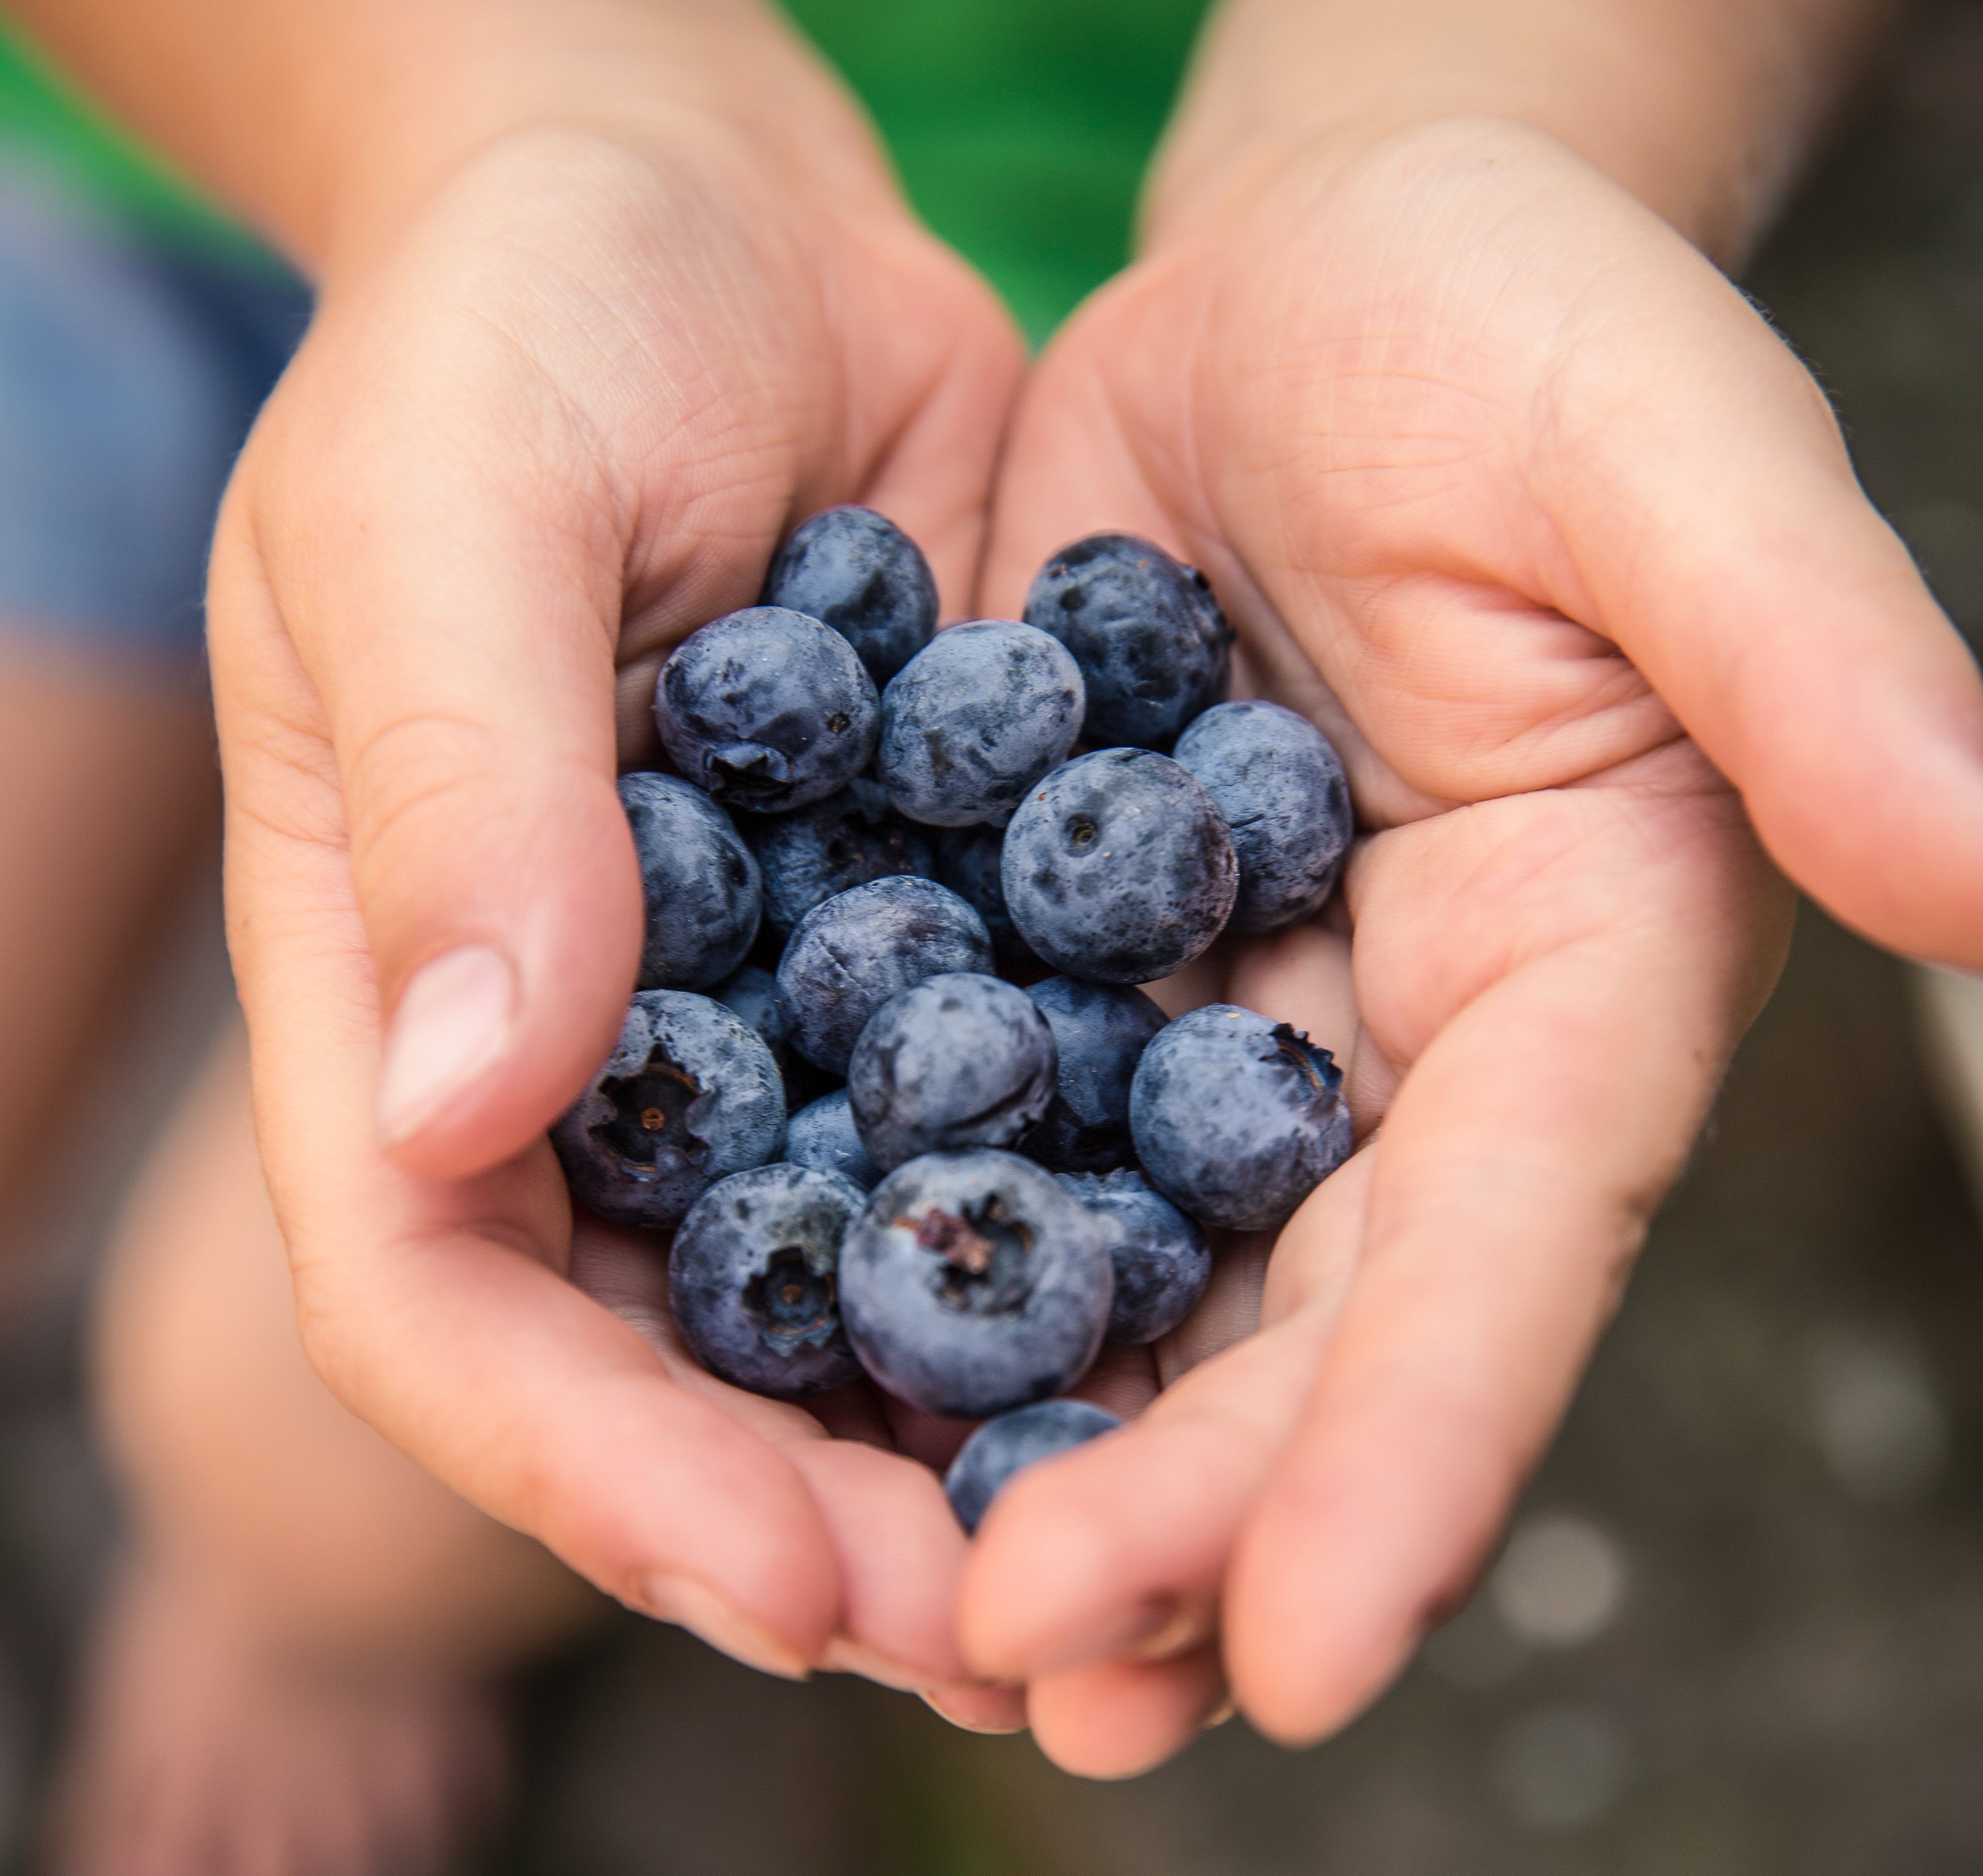 Blueberries in childs hands 